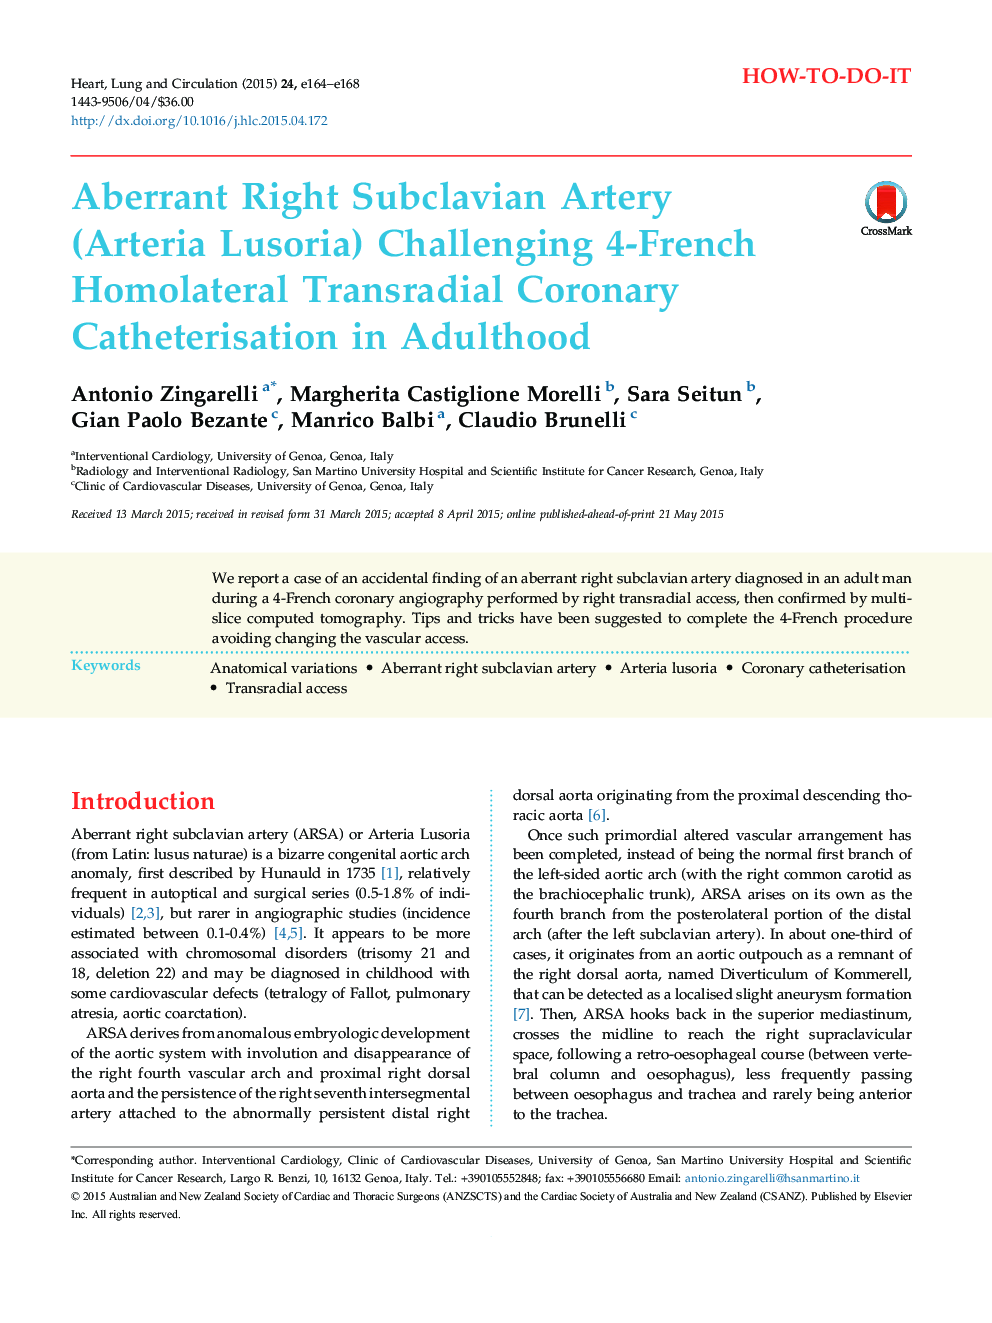 Aberrant Right Subclavian Artery (Arteria Lusoria) Challenging 4-French Homolateral Transradial Coronary Catheterisation in Adulthood